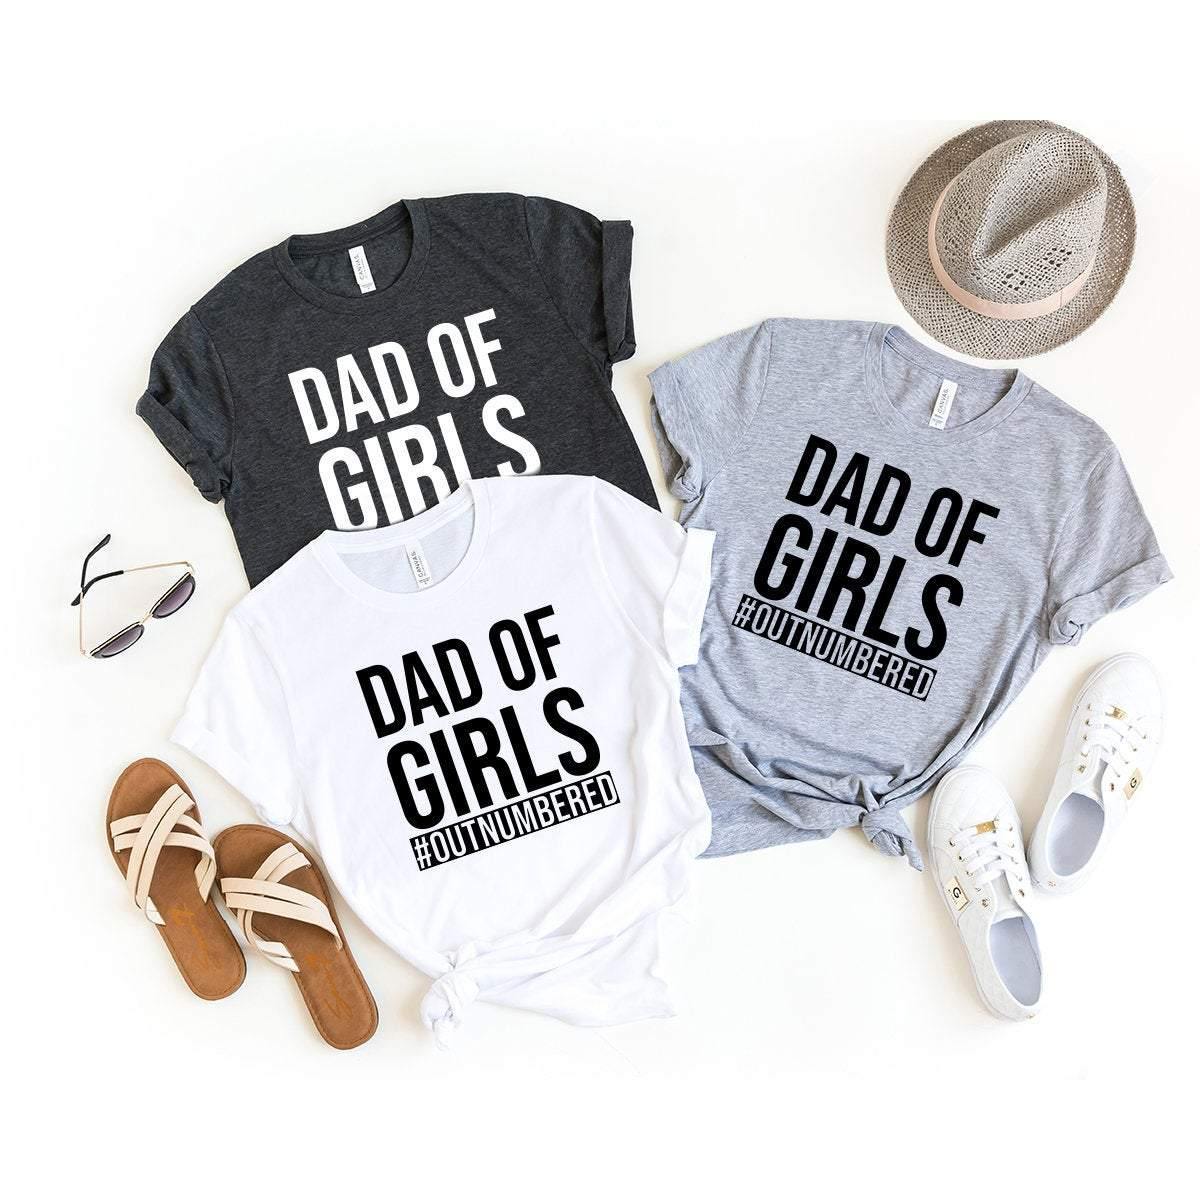 Dad Of Girls Shirt, Girl Dad T-Shirt, Girl Dad Gift, Gift From Daughter, Girl Daddy Shirt, Gift For Dad, Girldad Shirt, Father's Day Shirt - Fastdeliverytees.com